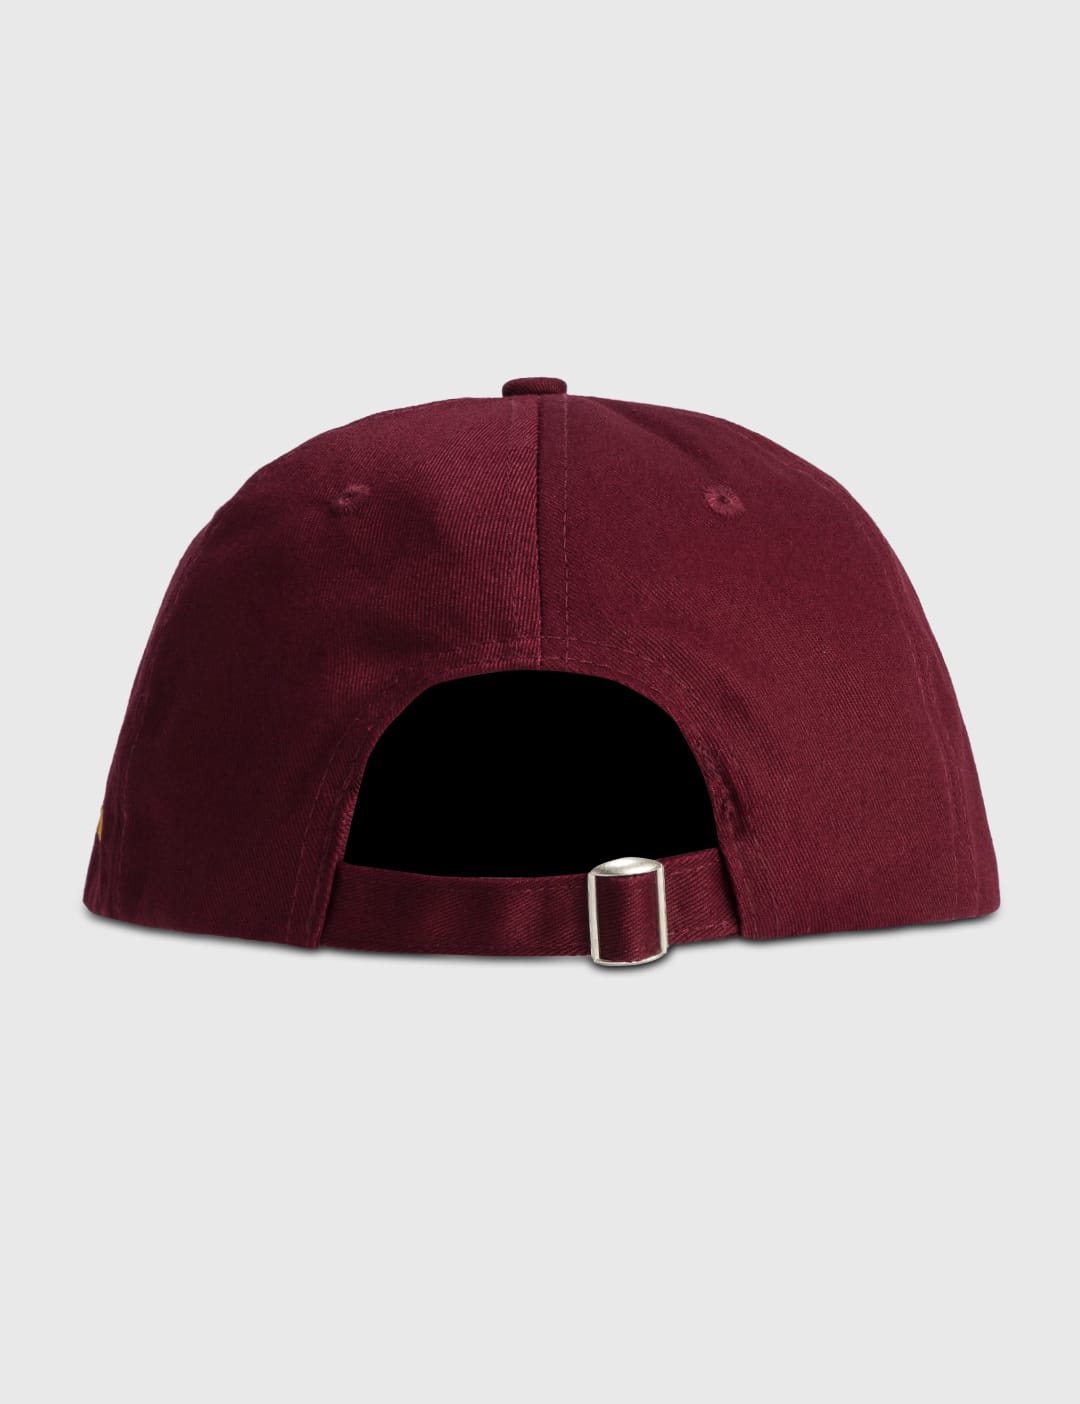 Sporty & Rich - WELLNESS IVY HAT | HBX - Globally Curated Fashion 